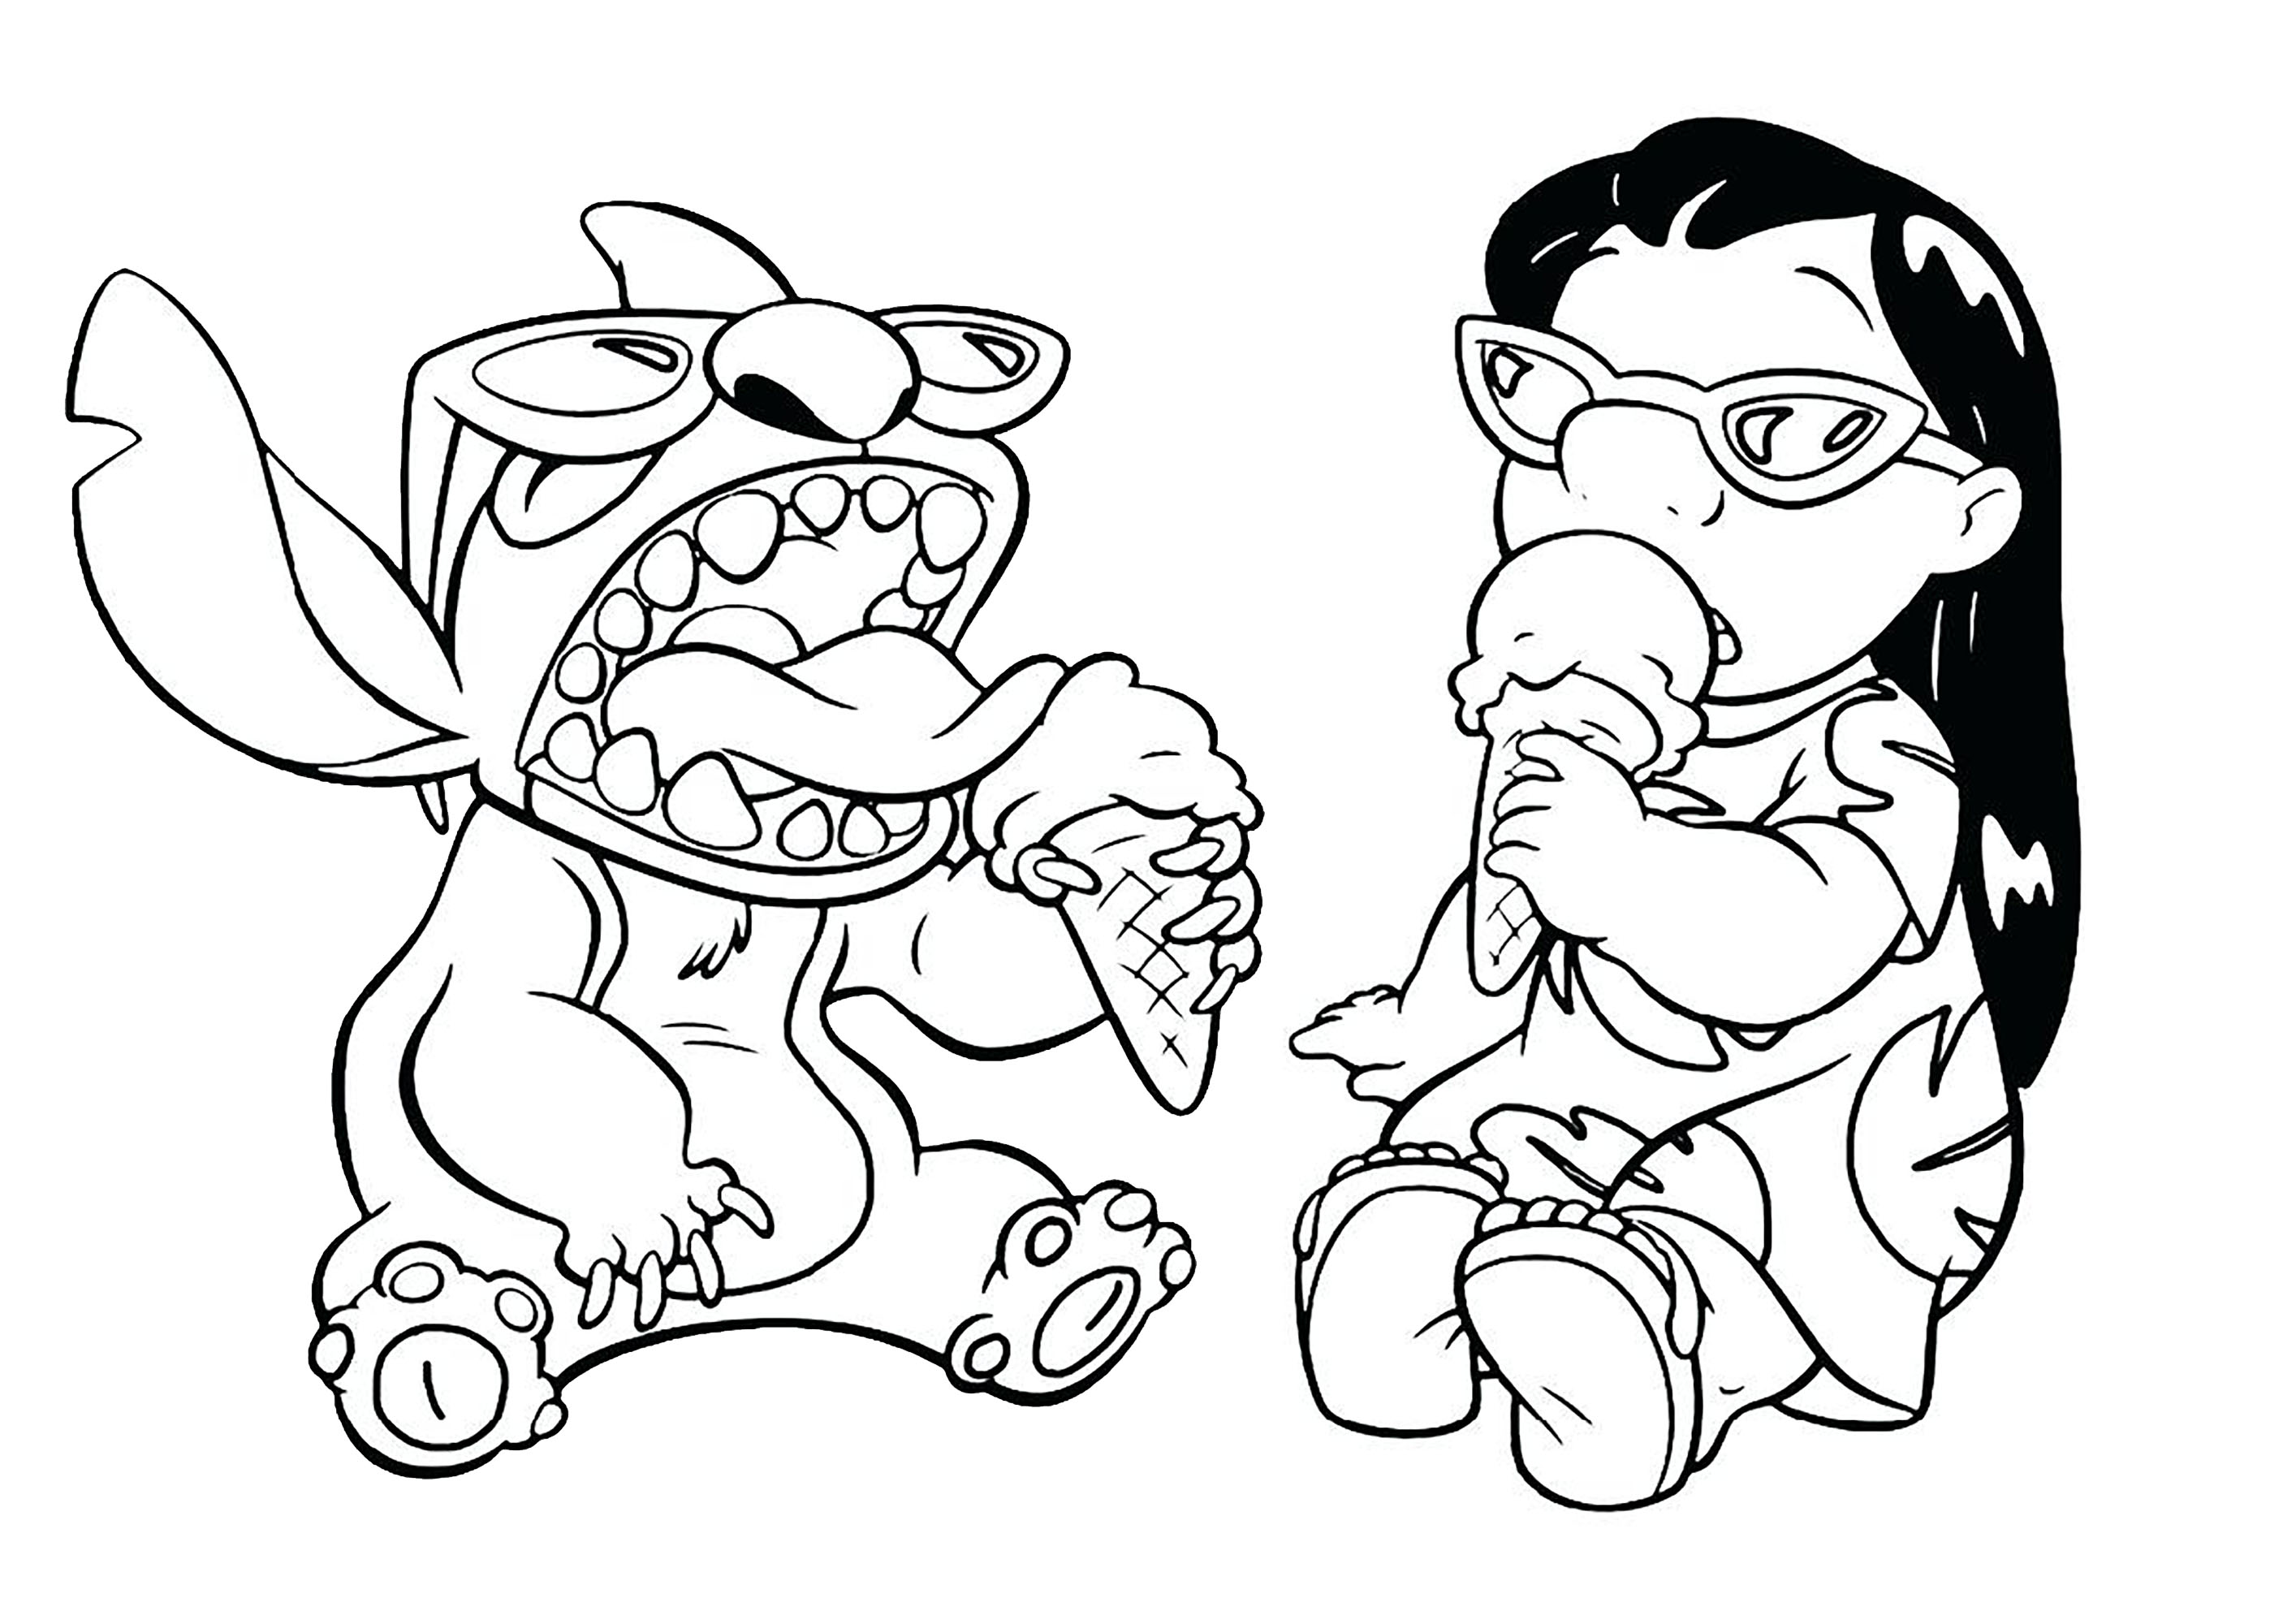 Lilo and stich coloring pages for children - Lilo And Stich Kids